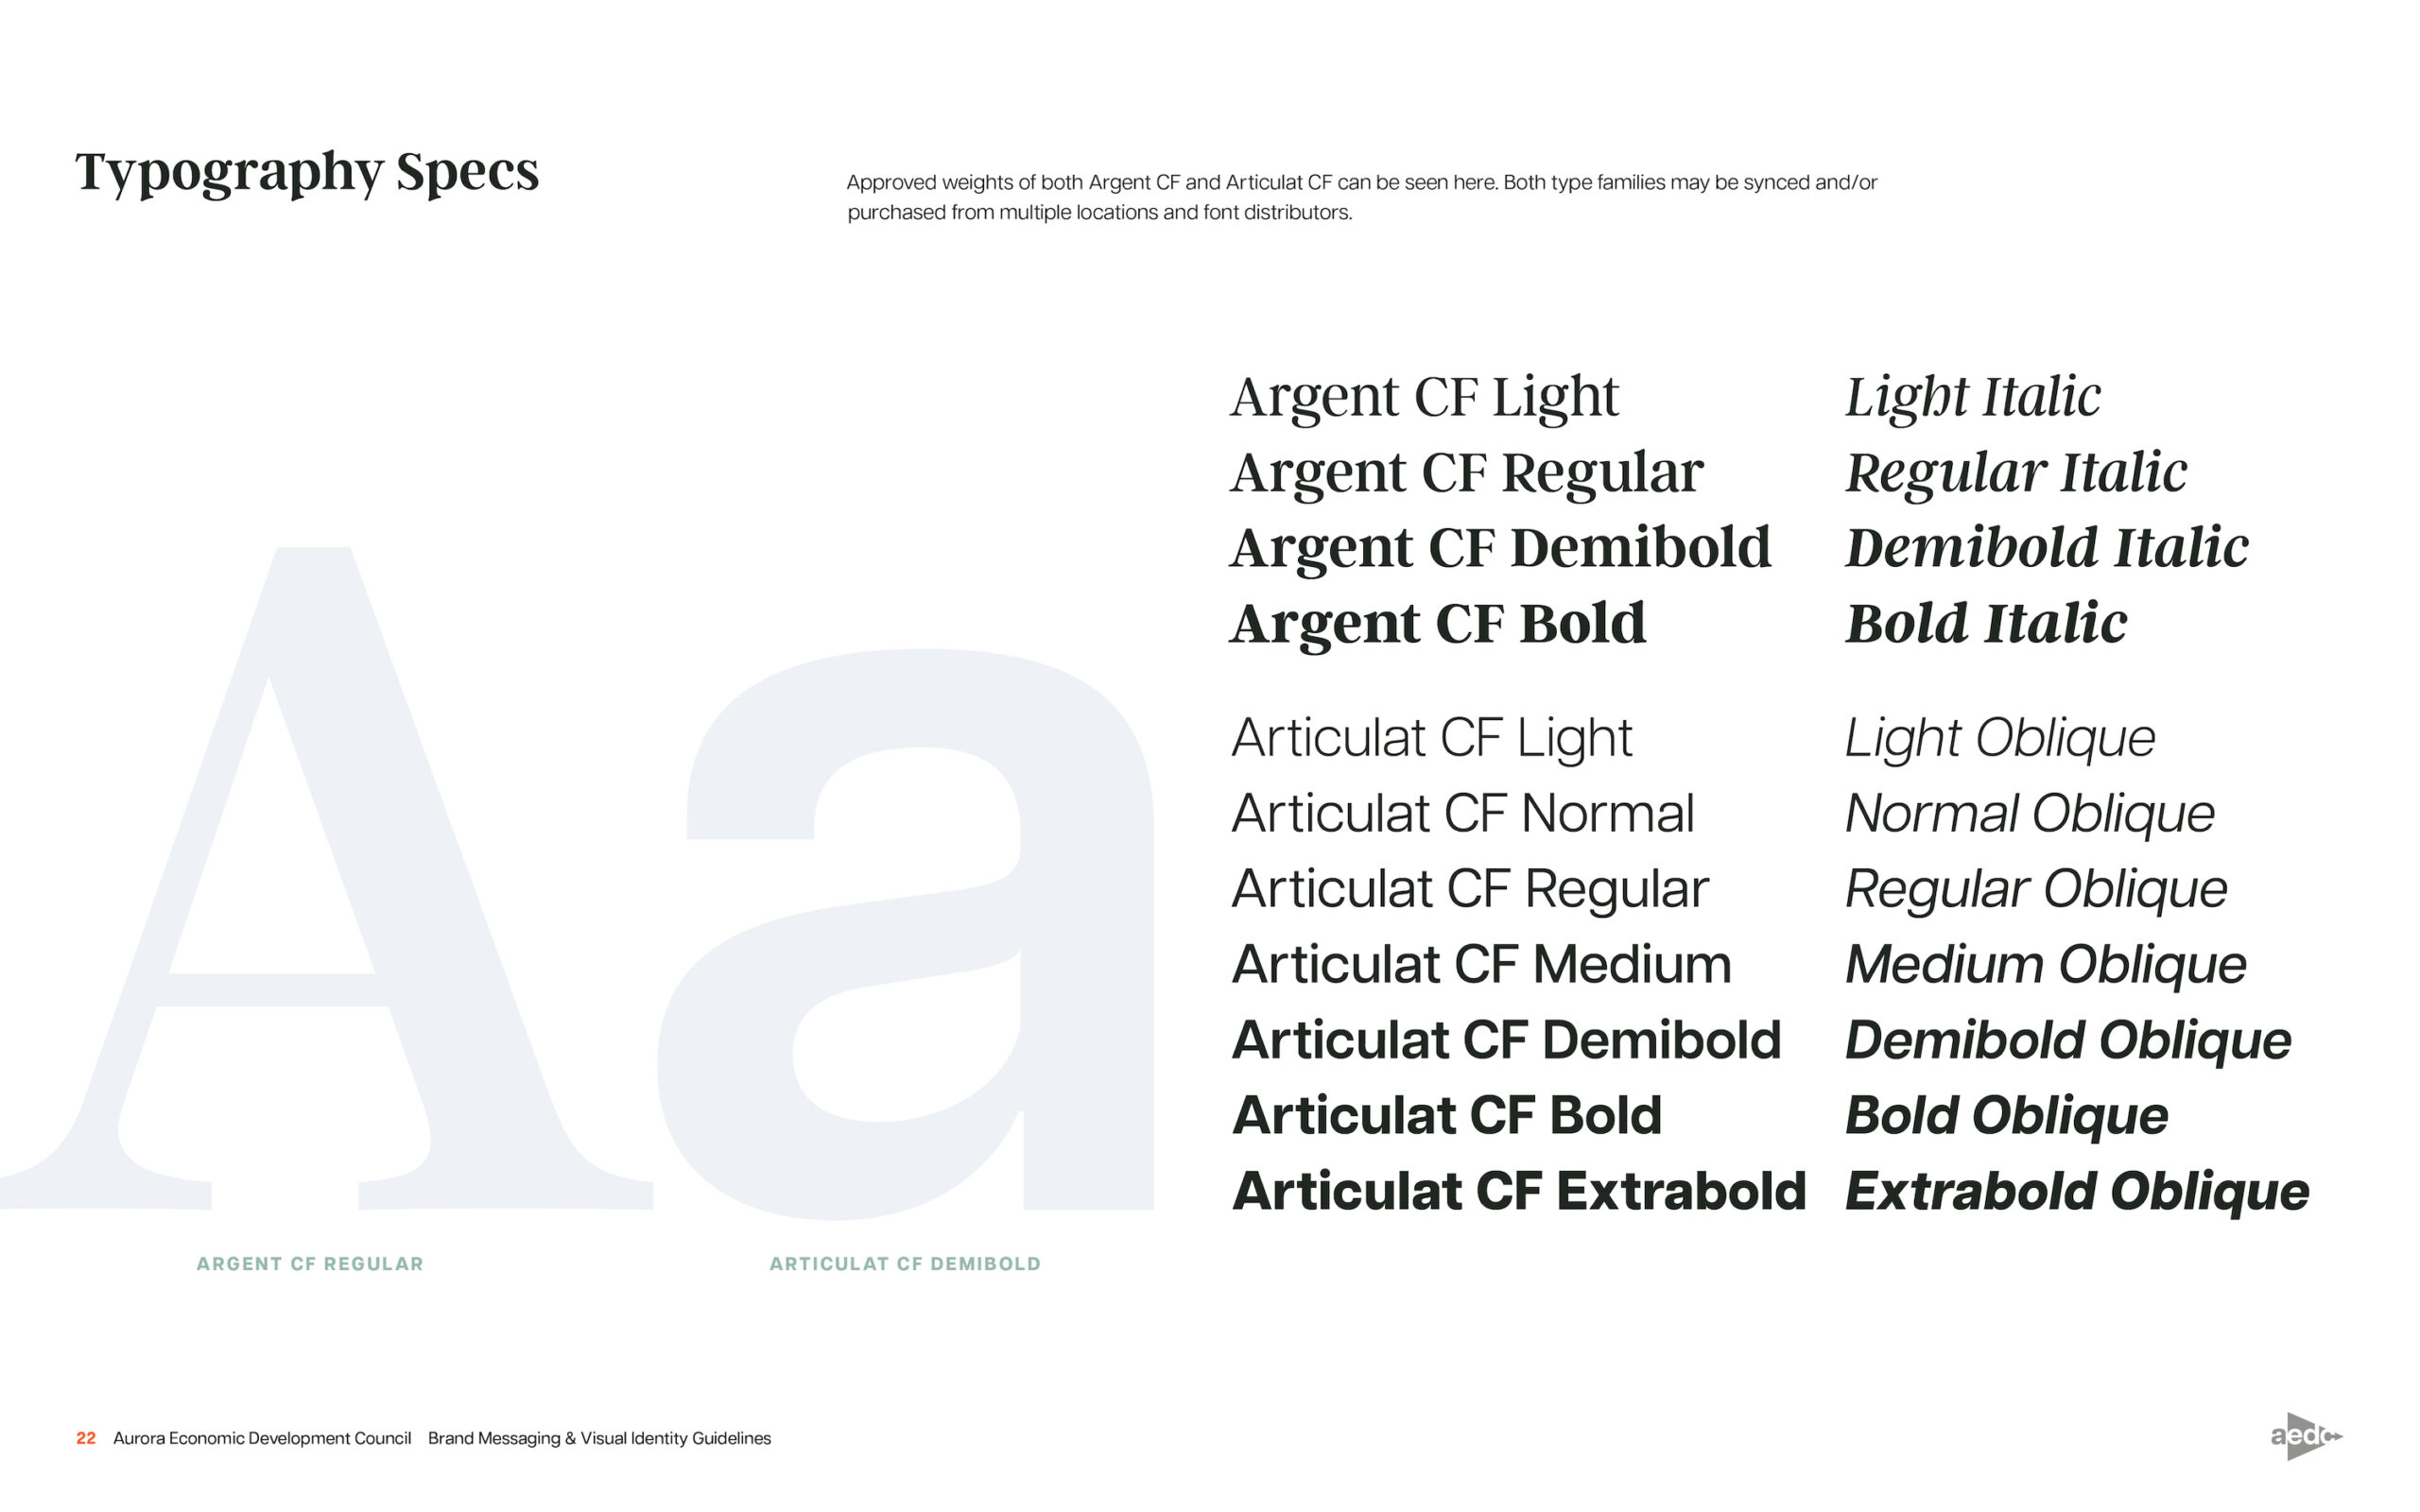 a page from the AEDC brand guidelines outlining the typography rules